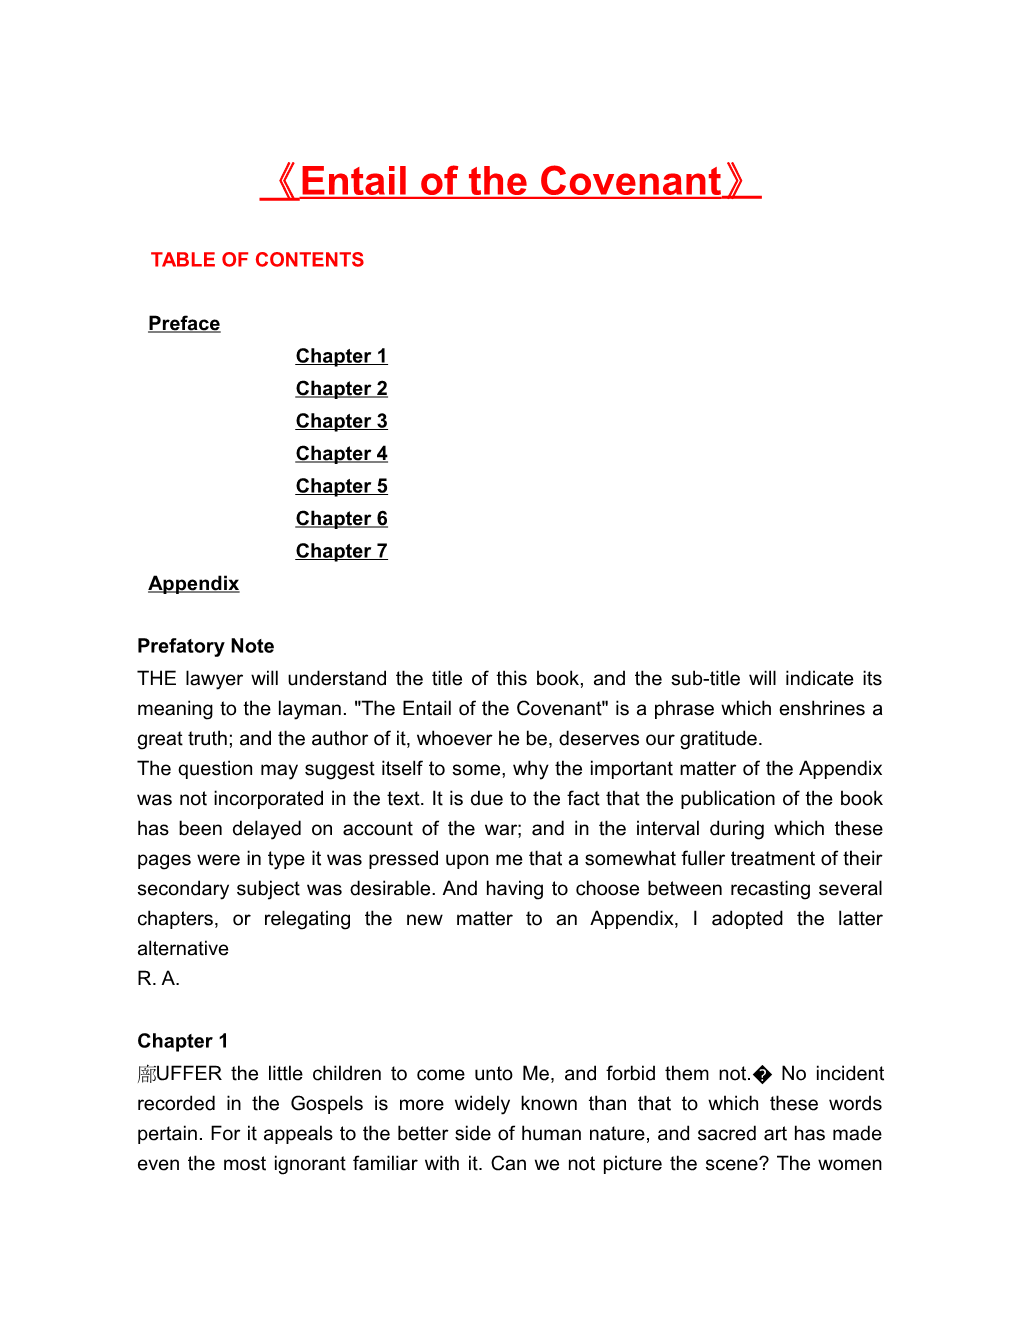 Entail of the Covenant